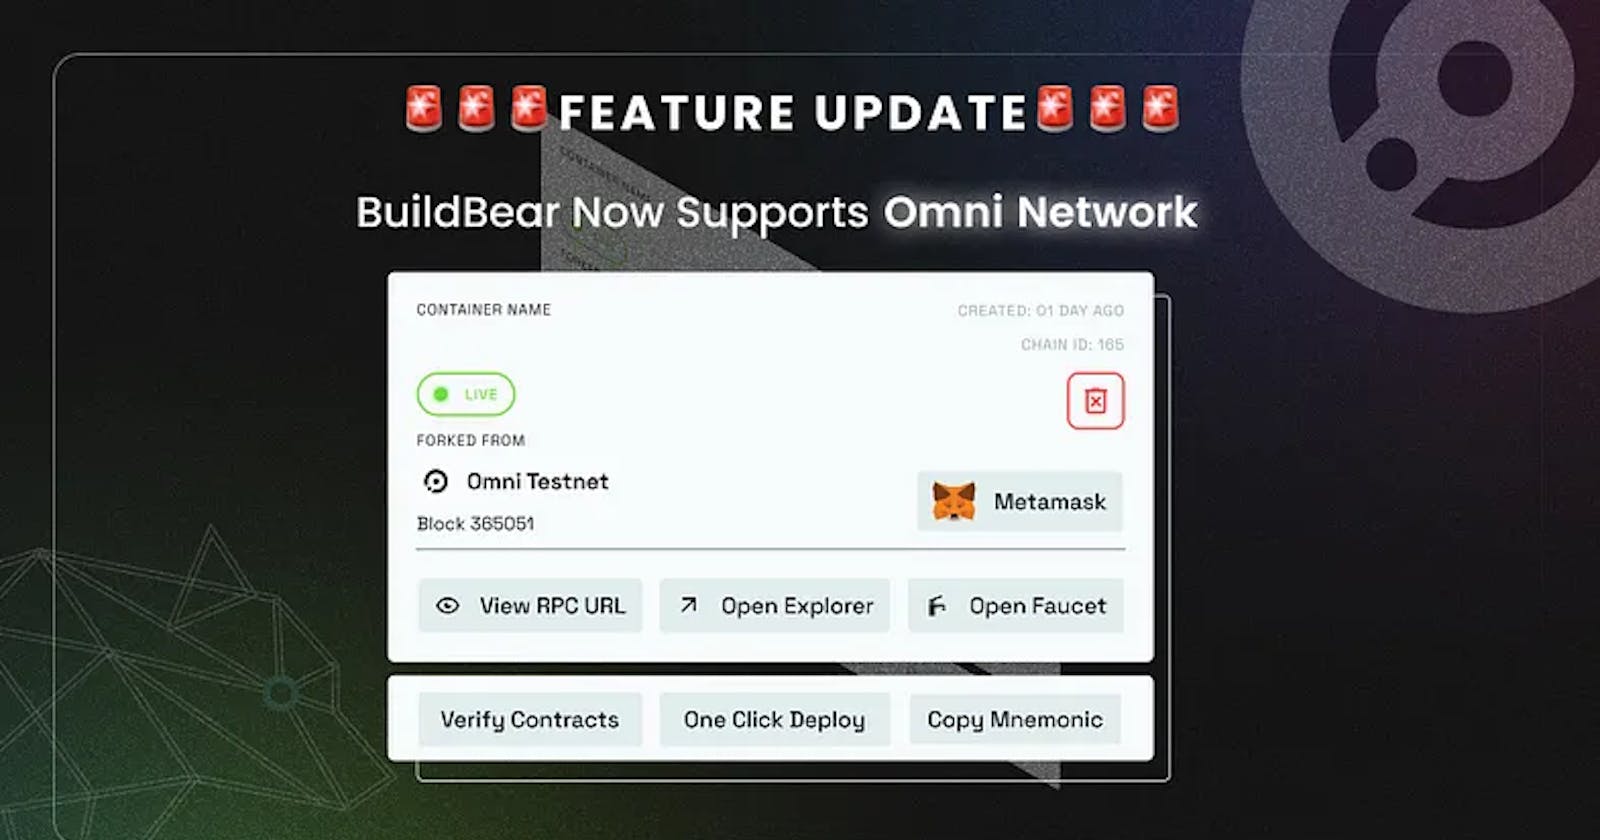 Exciting News! BuildBear Now Supports Omni Testnet!